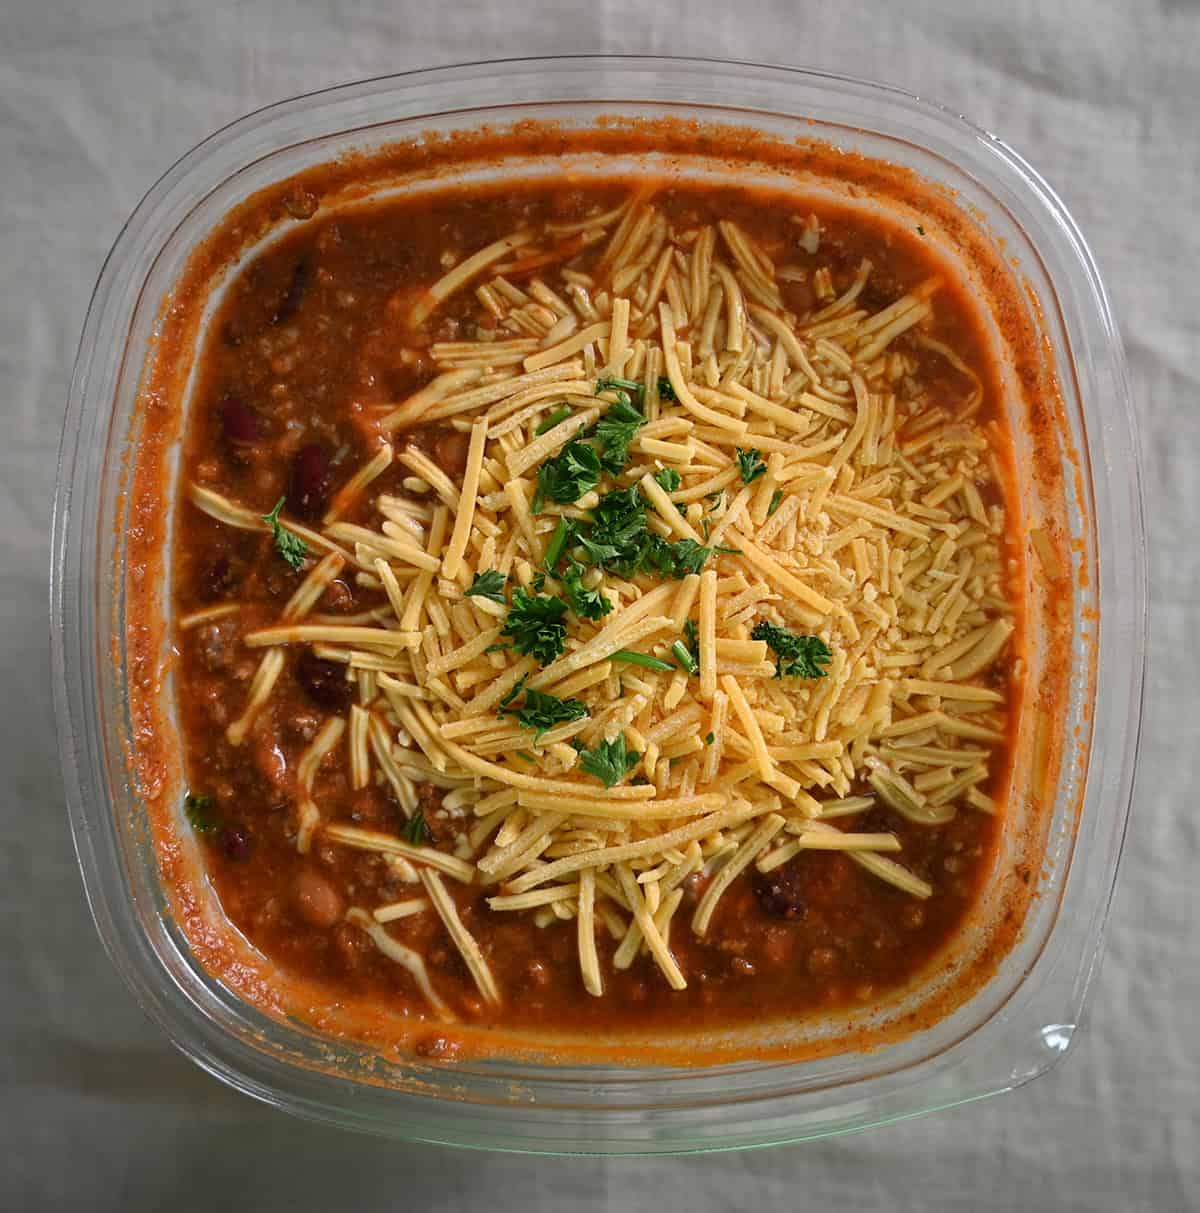 Top down image of an open container of Kirkland Signature Beef Chili showing cheese and parsley on top.